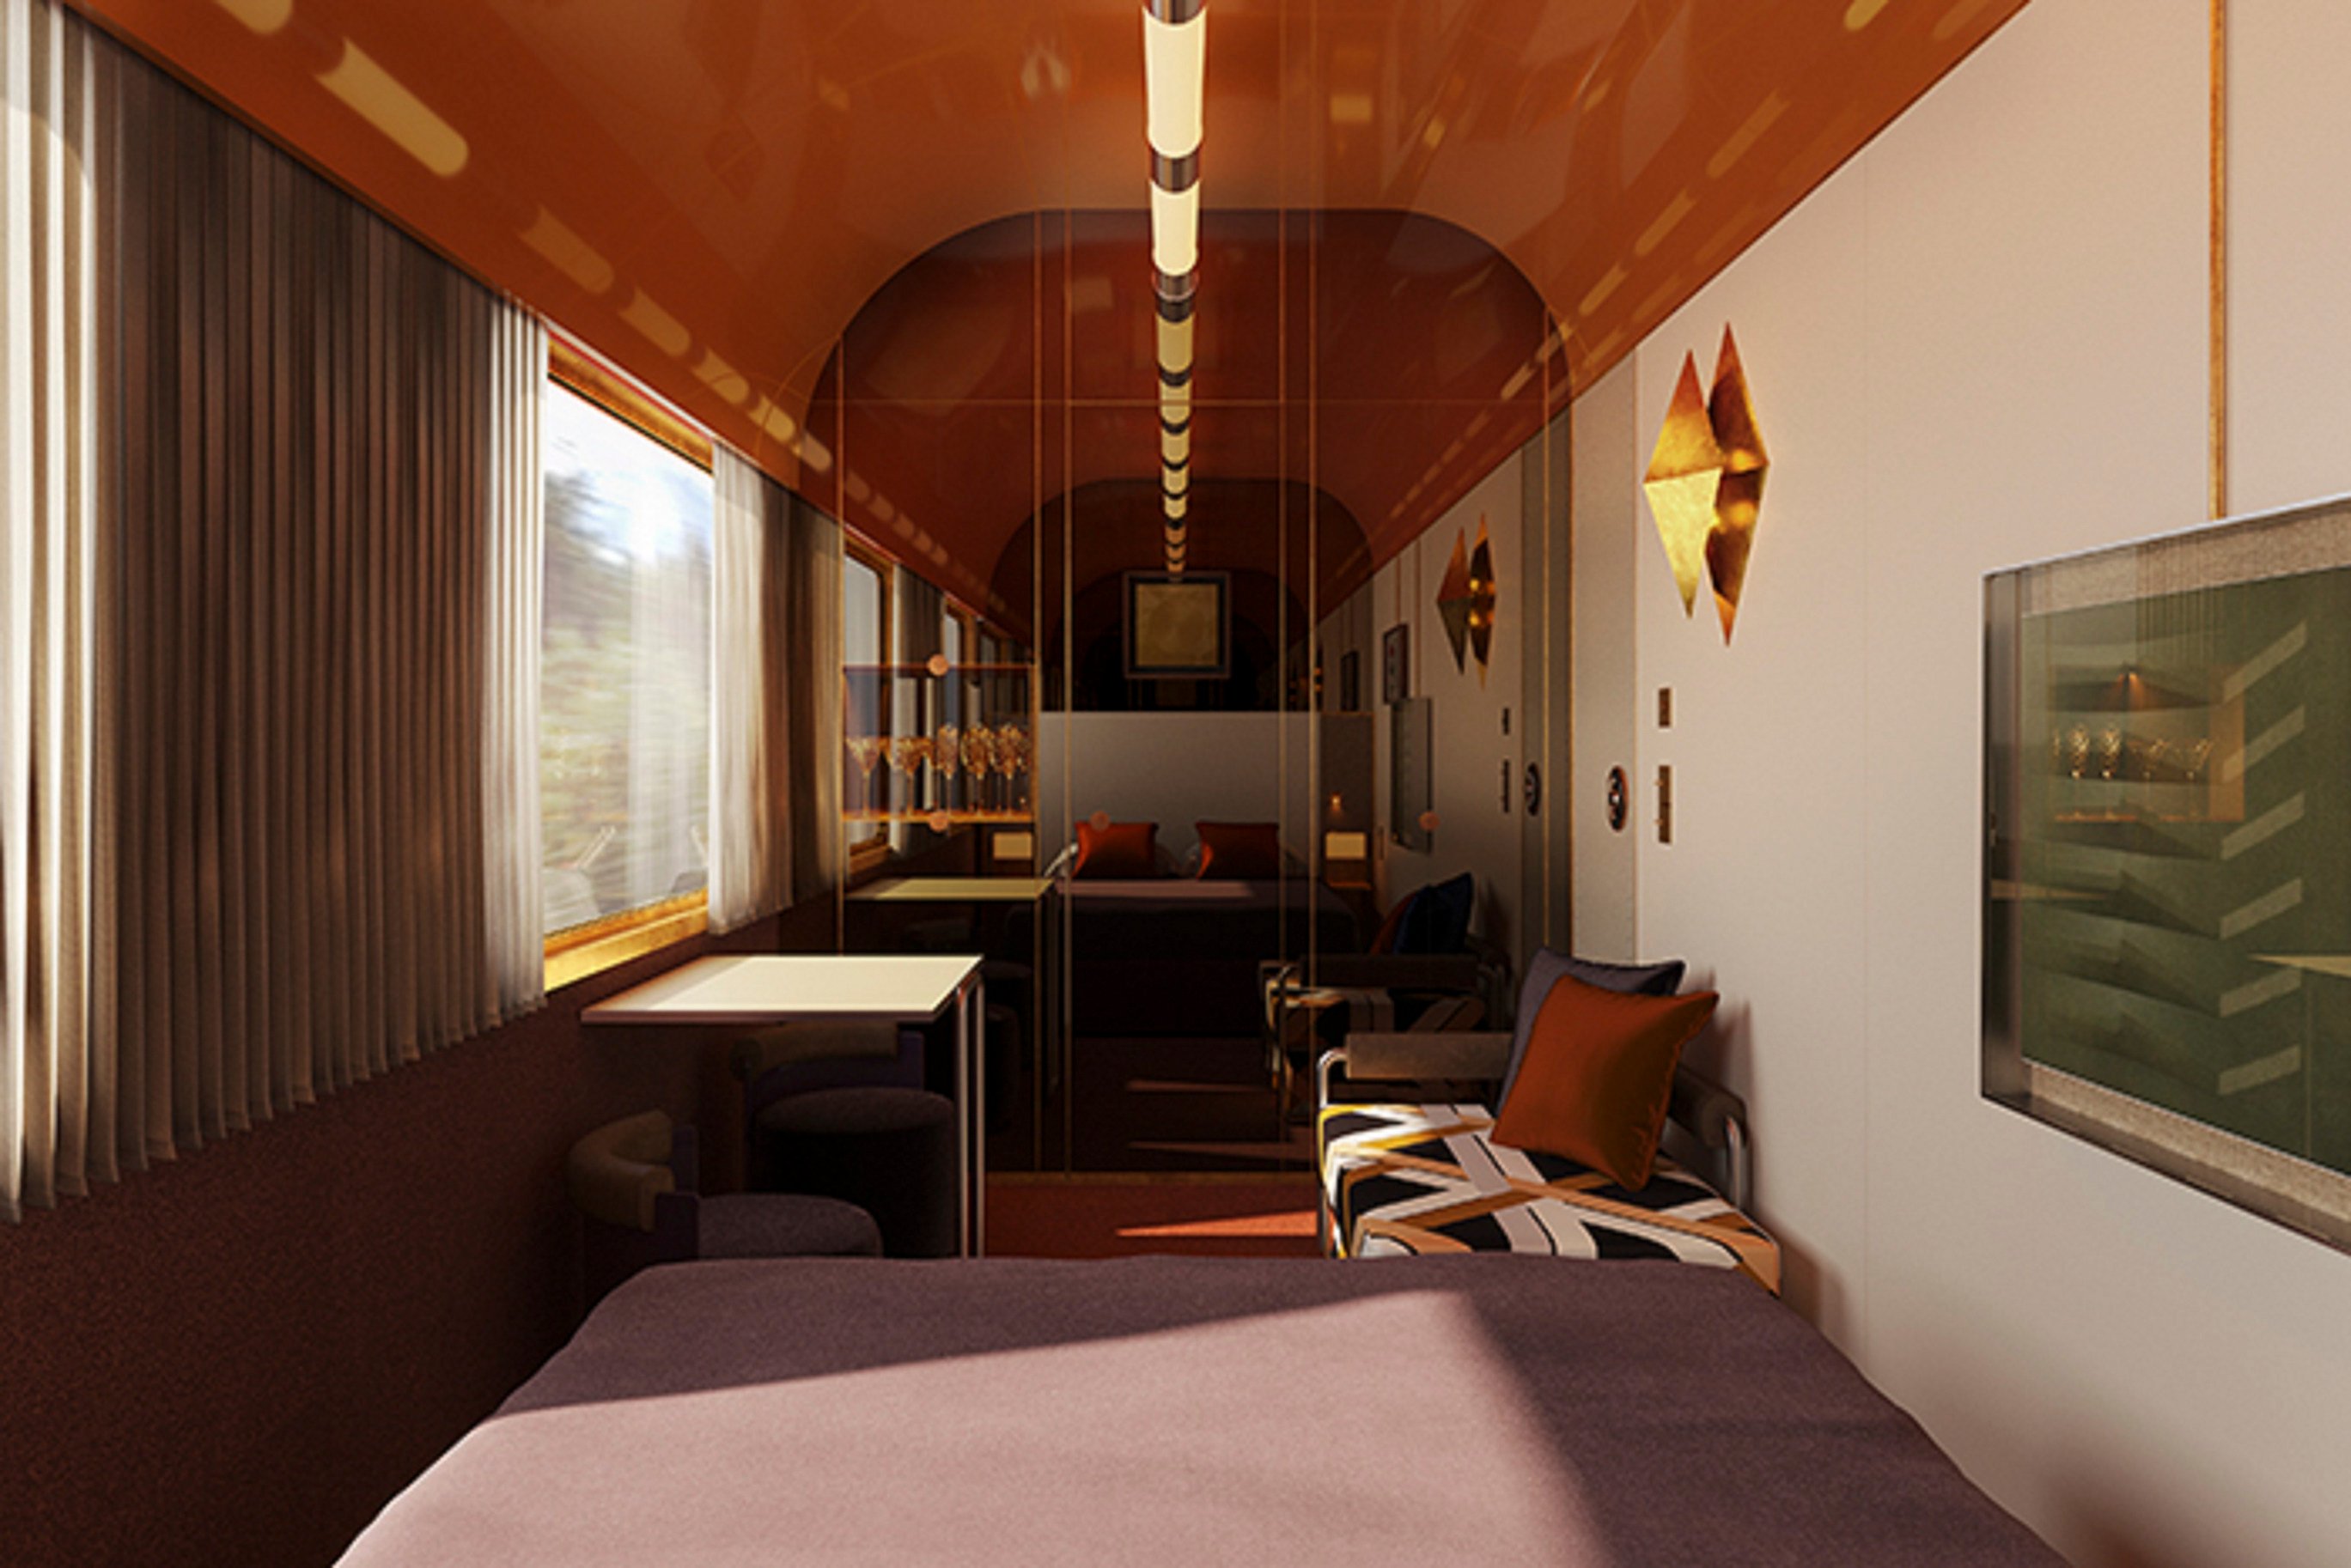 In pictures: Italy's new La Dolce Vita luxury train offers adventure,  comfort and sustainability for US$28,000 a night – and rich travellers  already booked the Orient Express experience through 2024